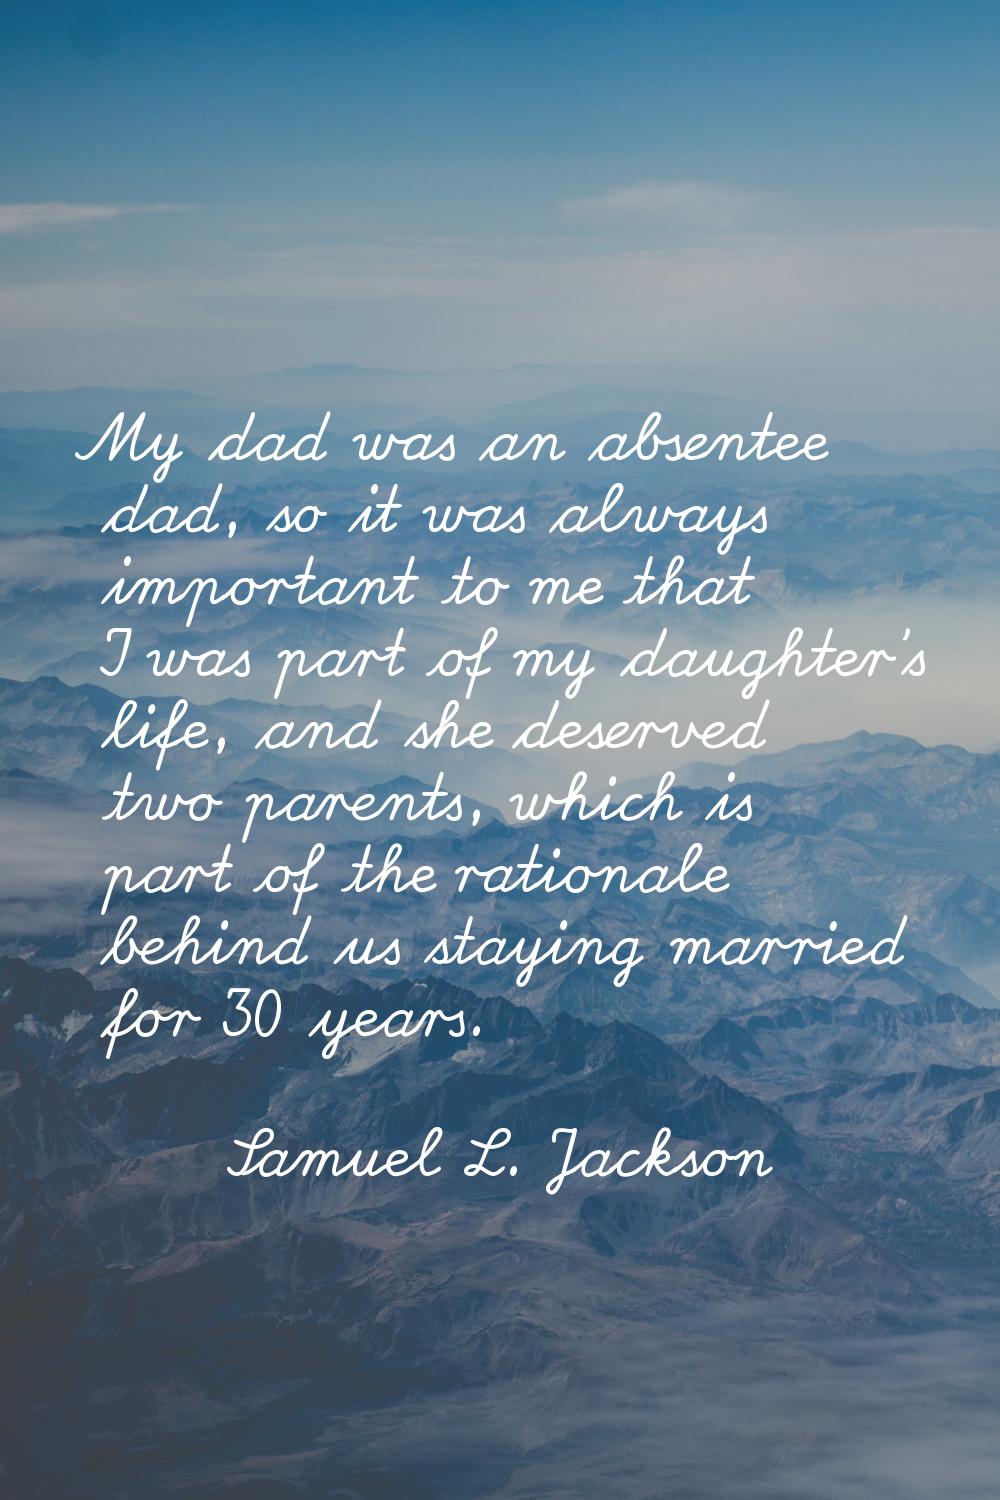 My dad was an absentee dad, so it was always important to me that I was part of my daughter's life,